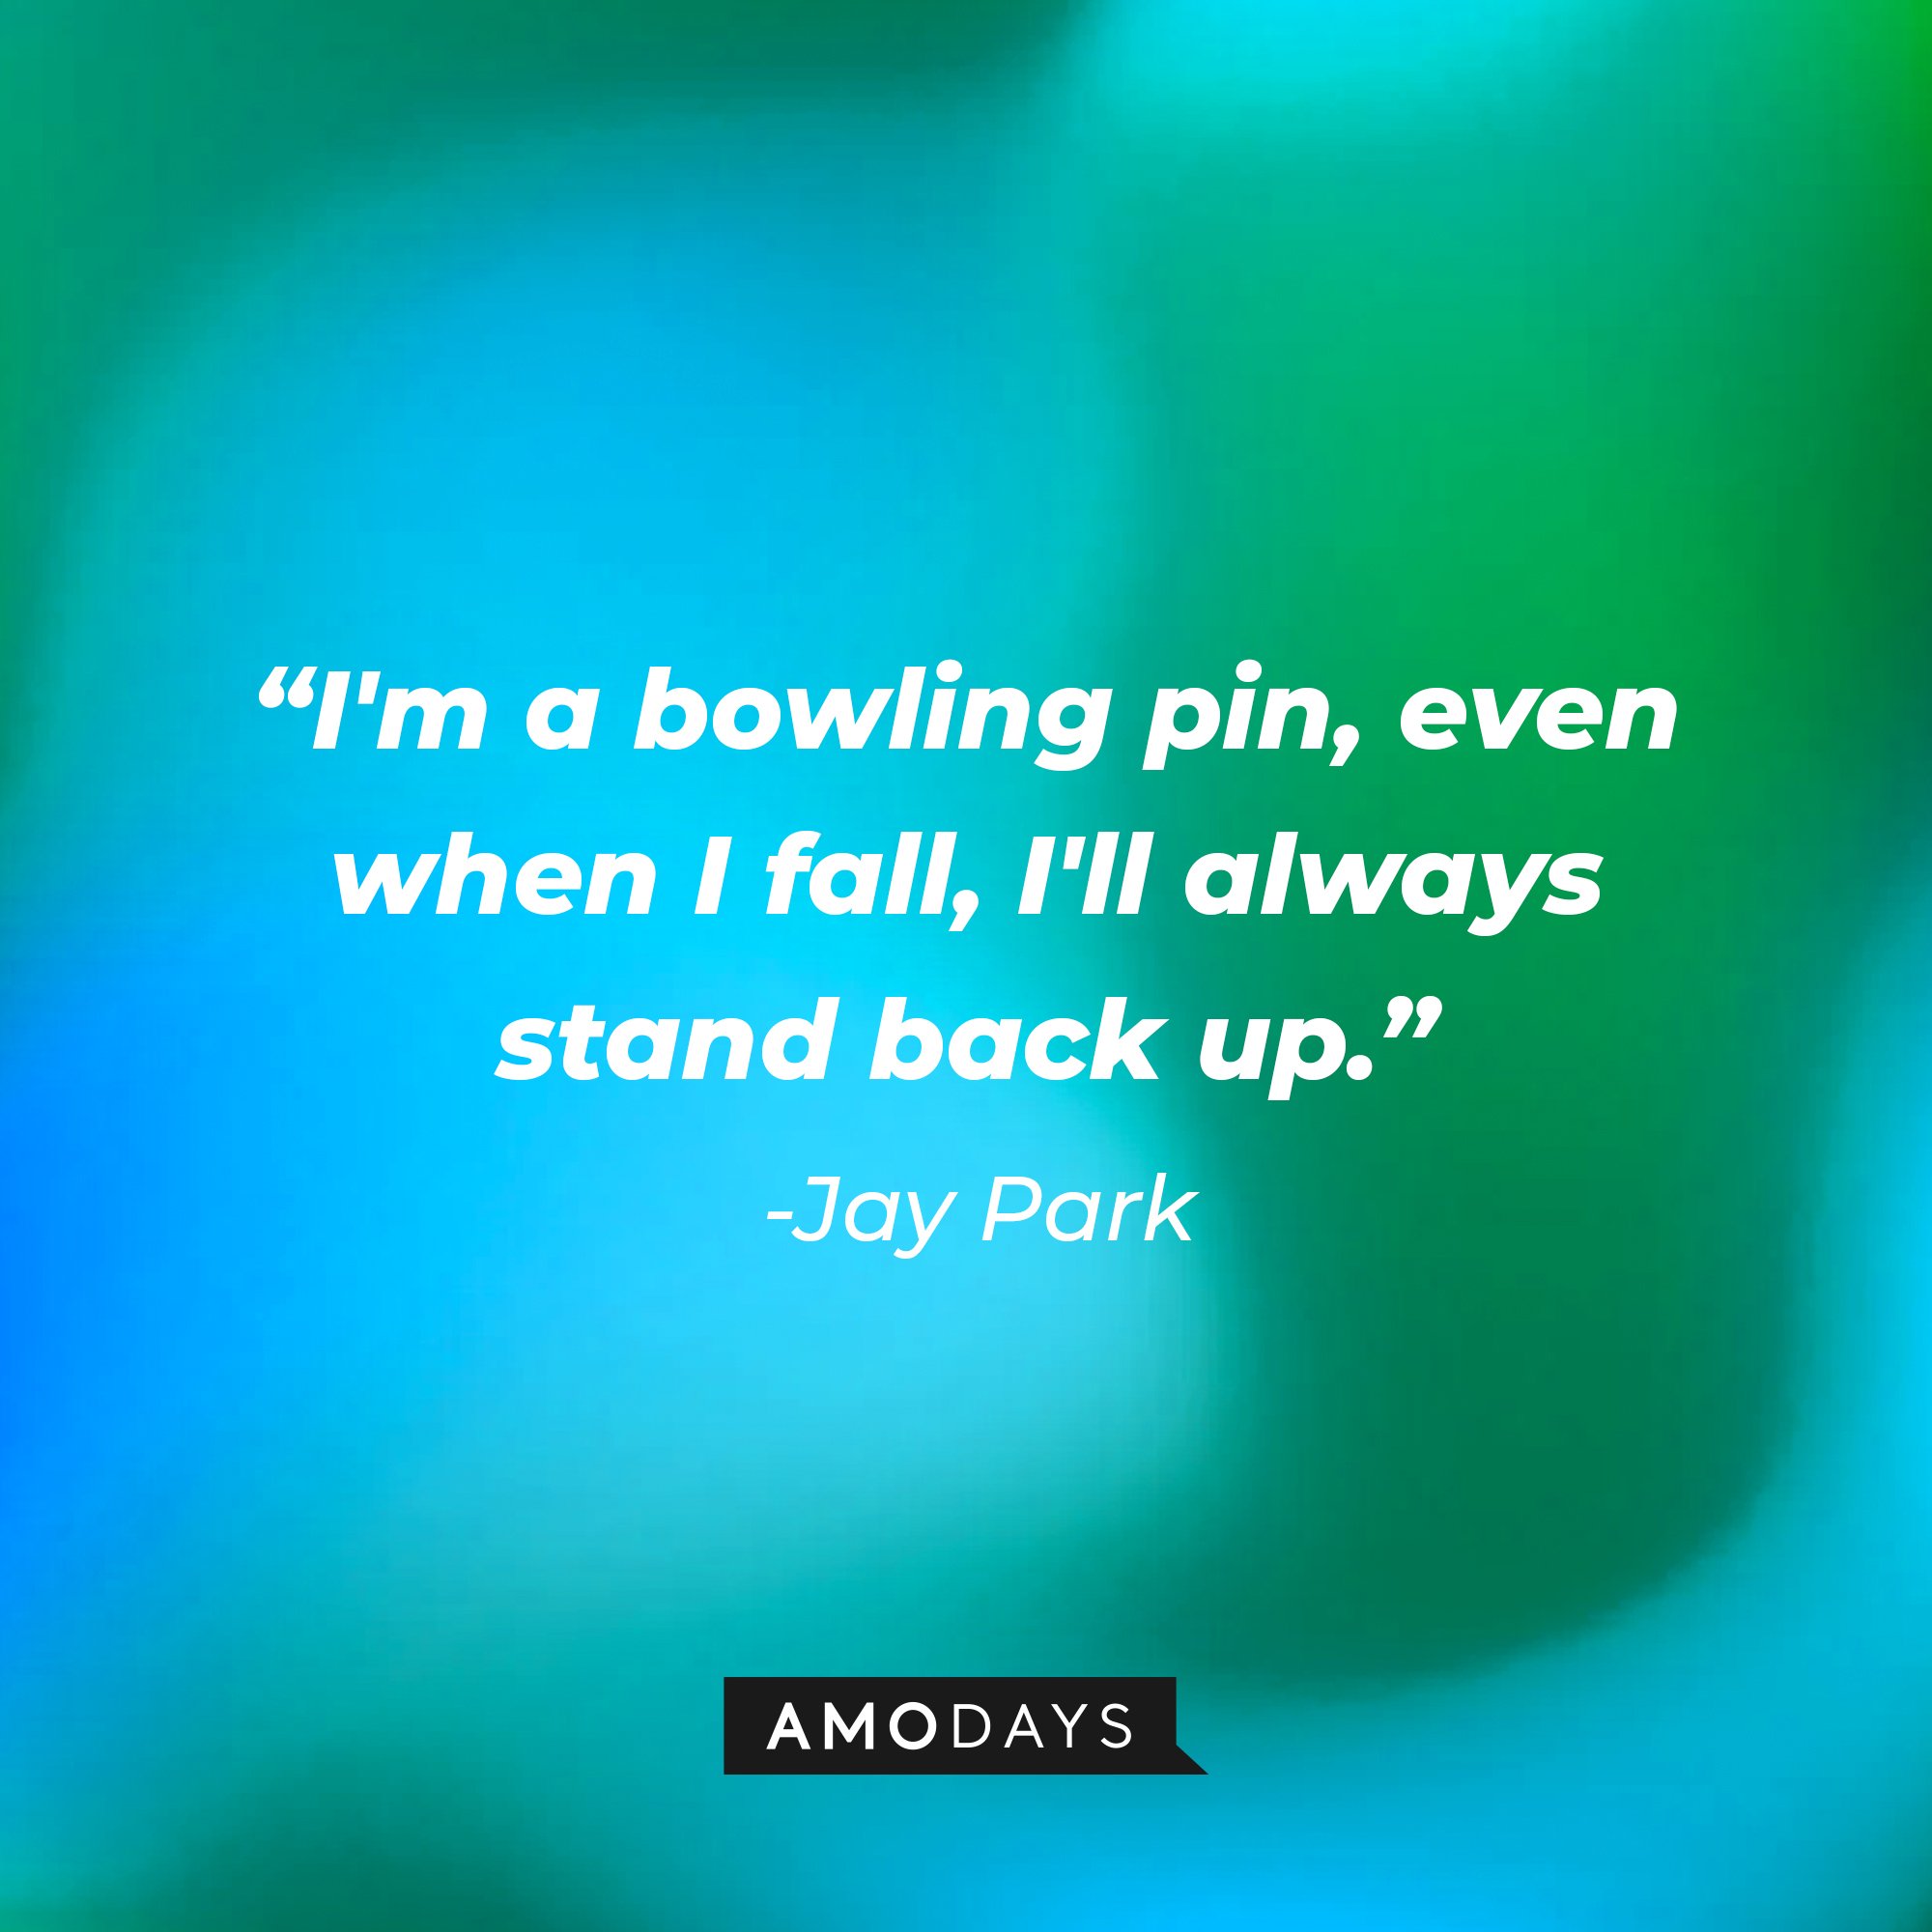 Jay Park's quote: "I'm a bowling pin, even when I fall, I'll always stand back up." | Image: AmoDays